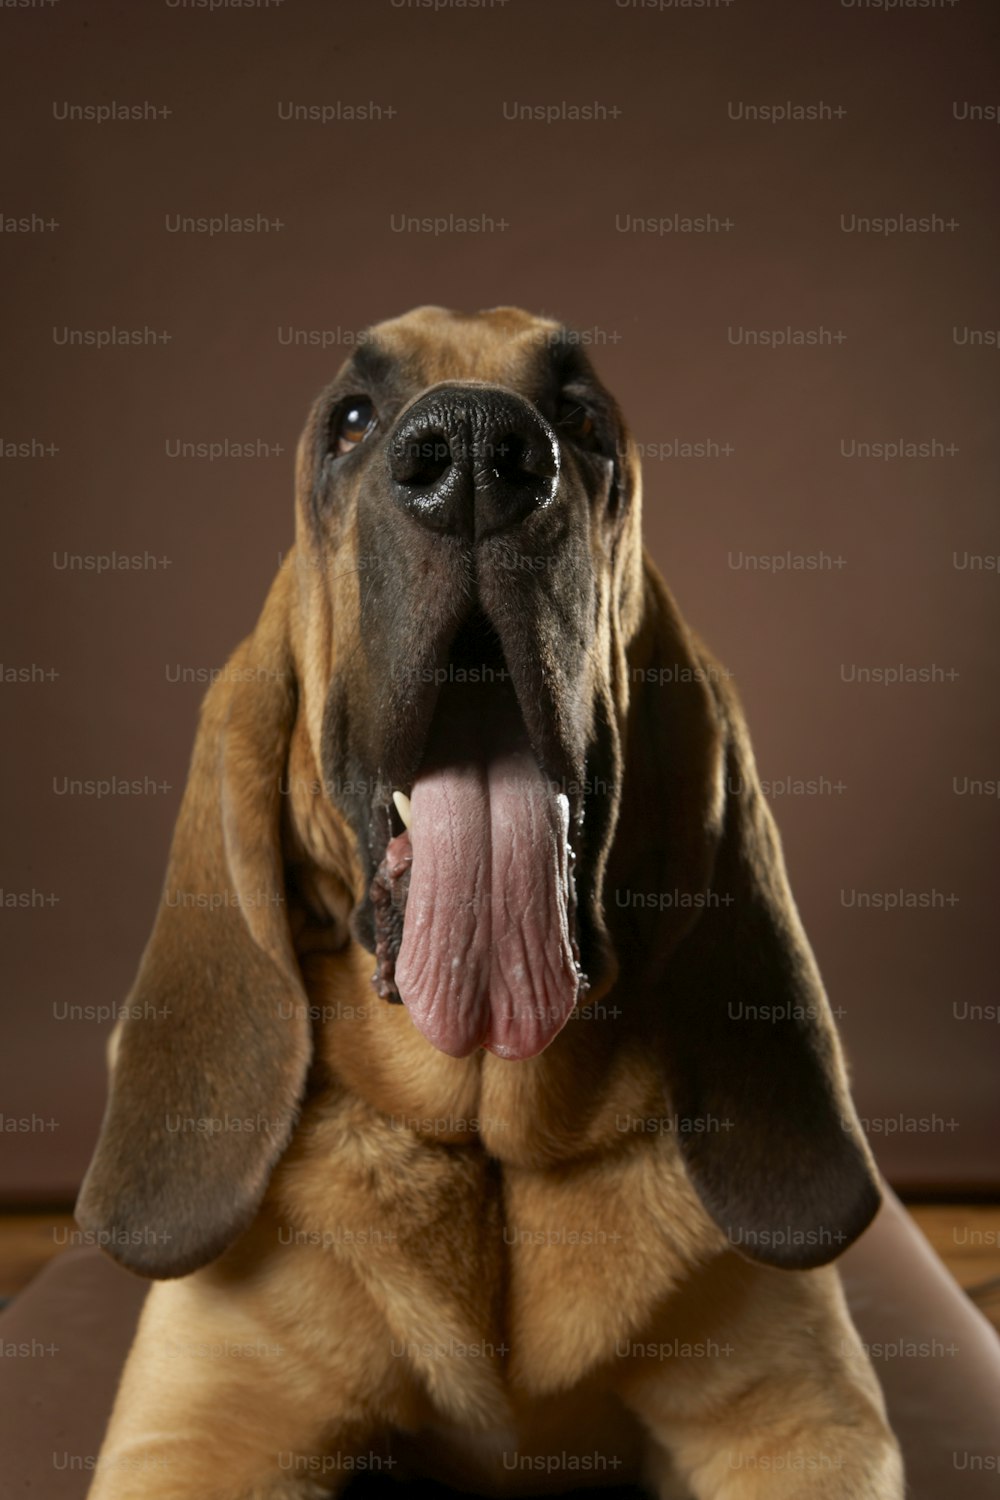 a dog with its tongue hanging out